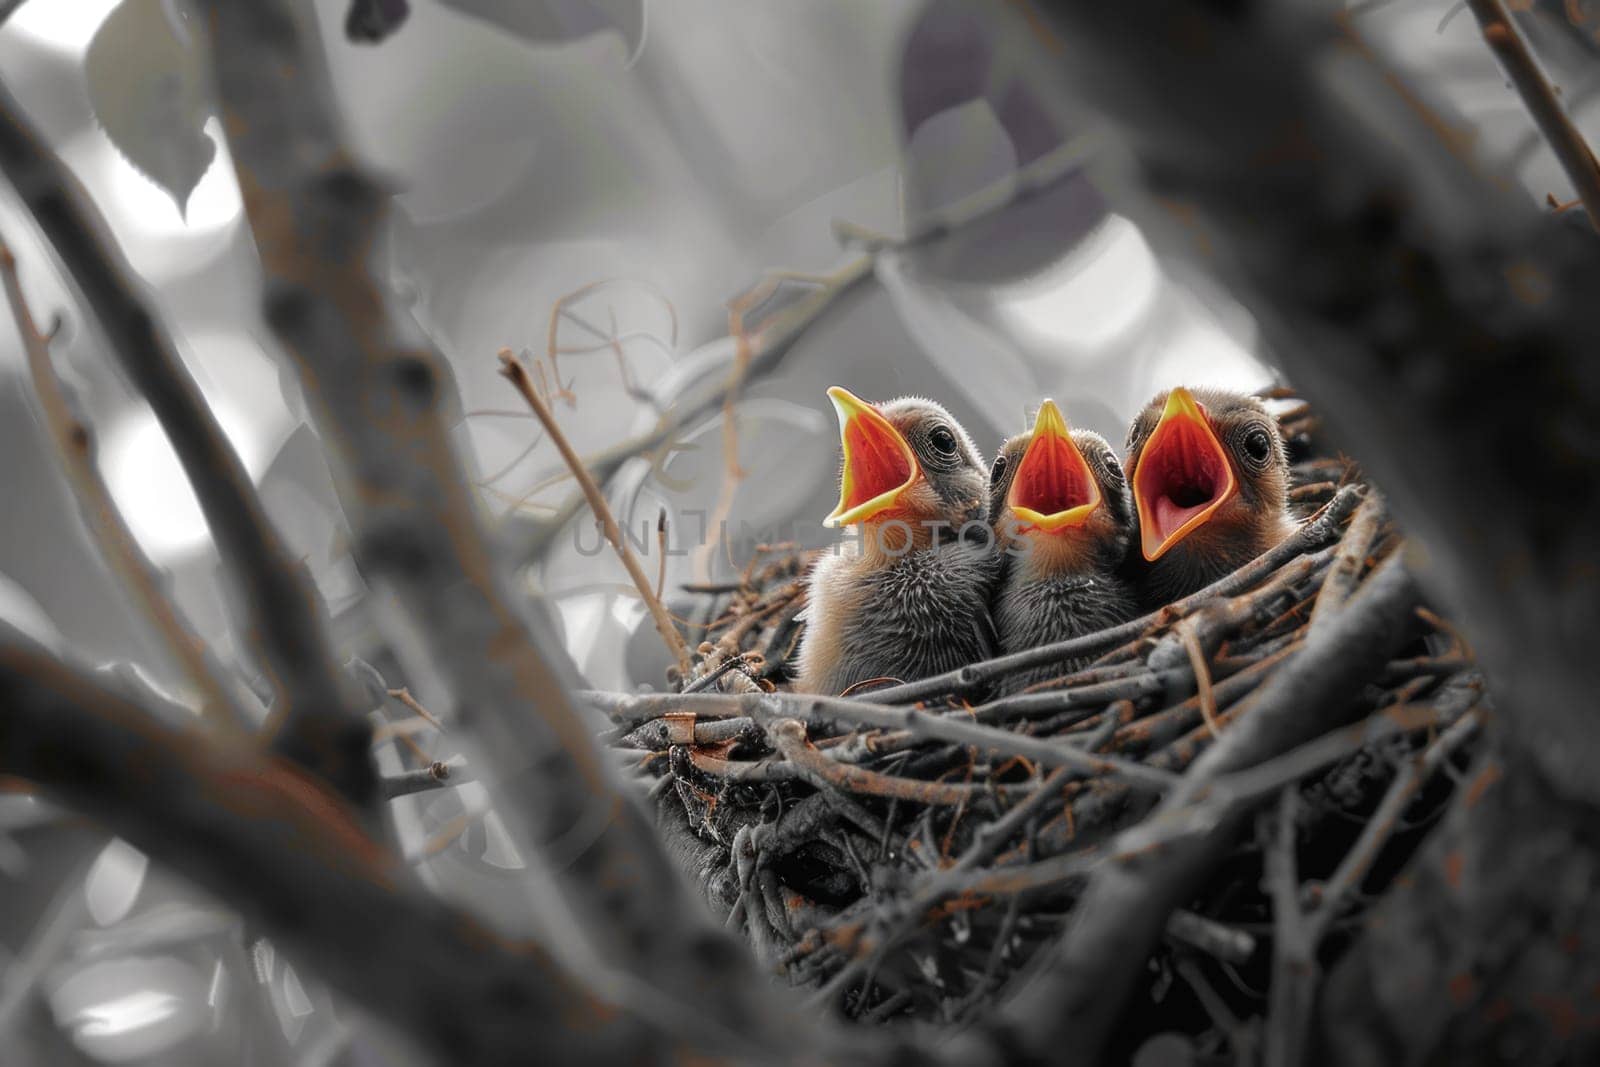 Three baby birds are sitting in a nest, one of which is eating.